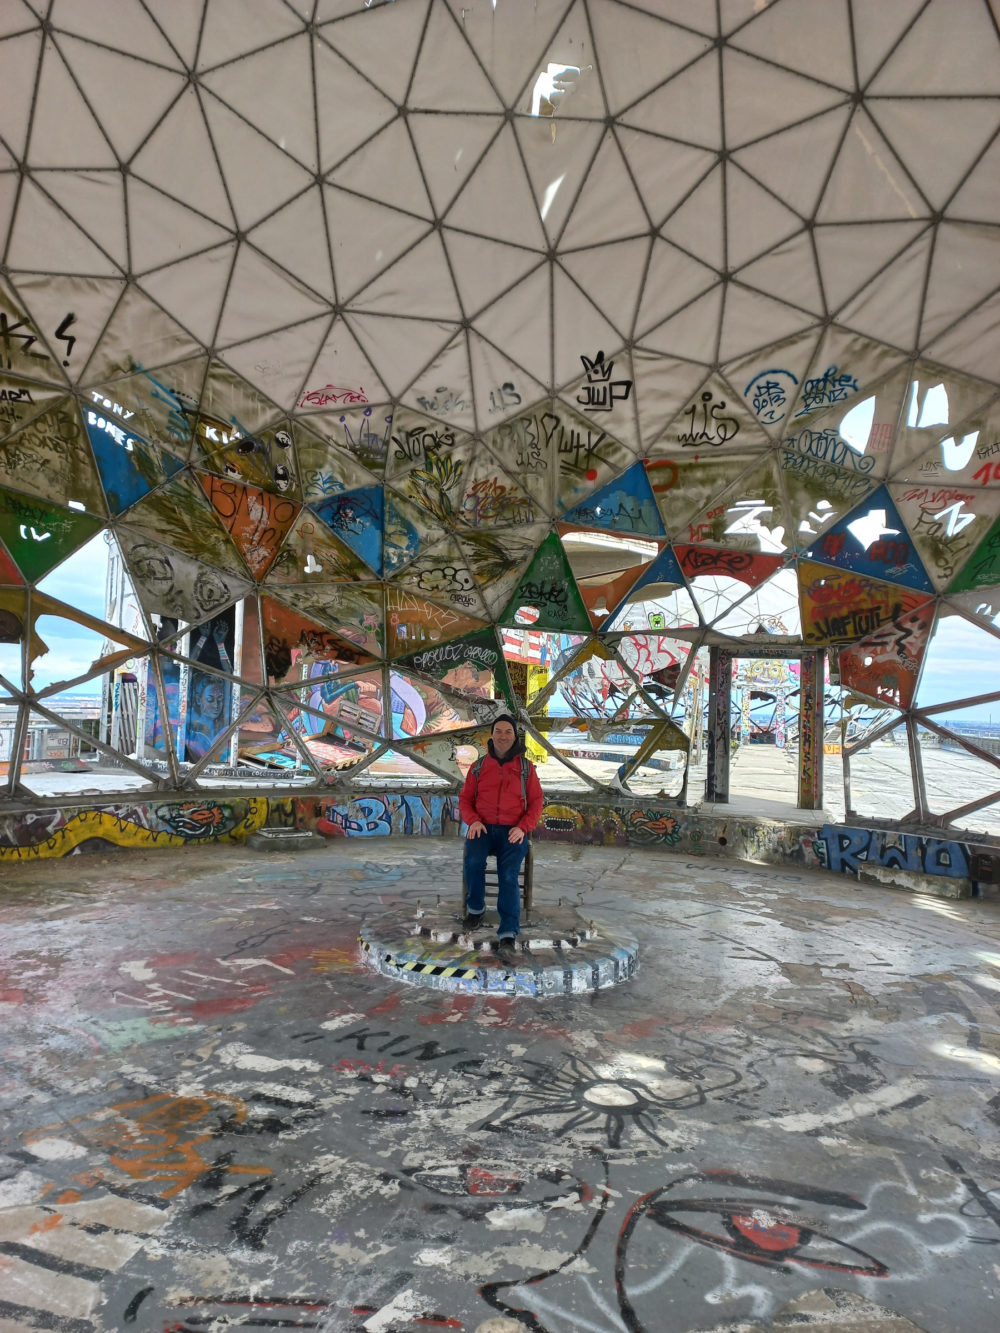 Me inside one of the The Teufelsberg spy domes